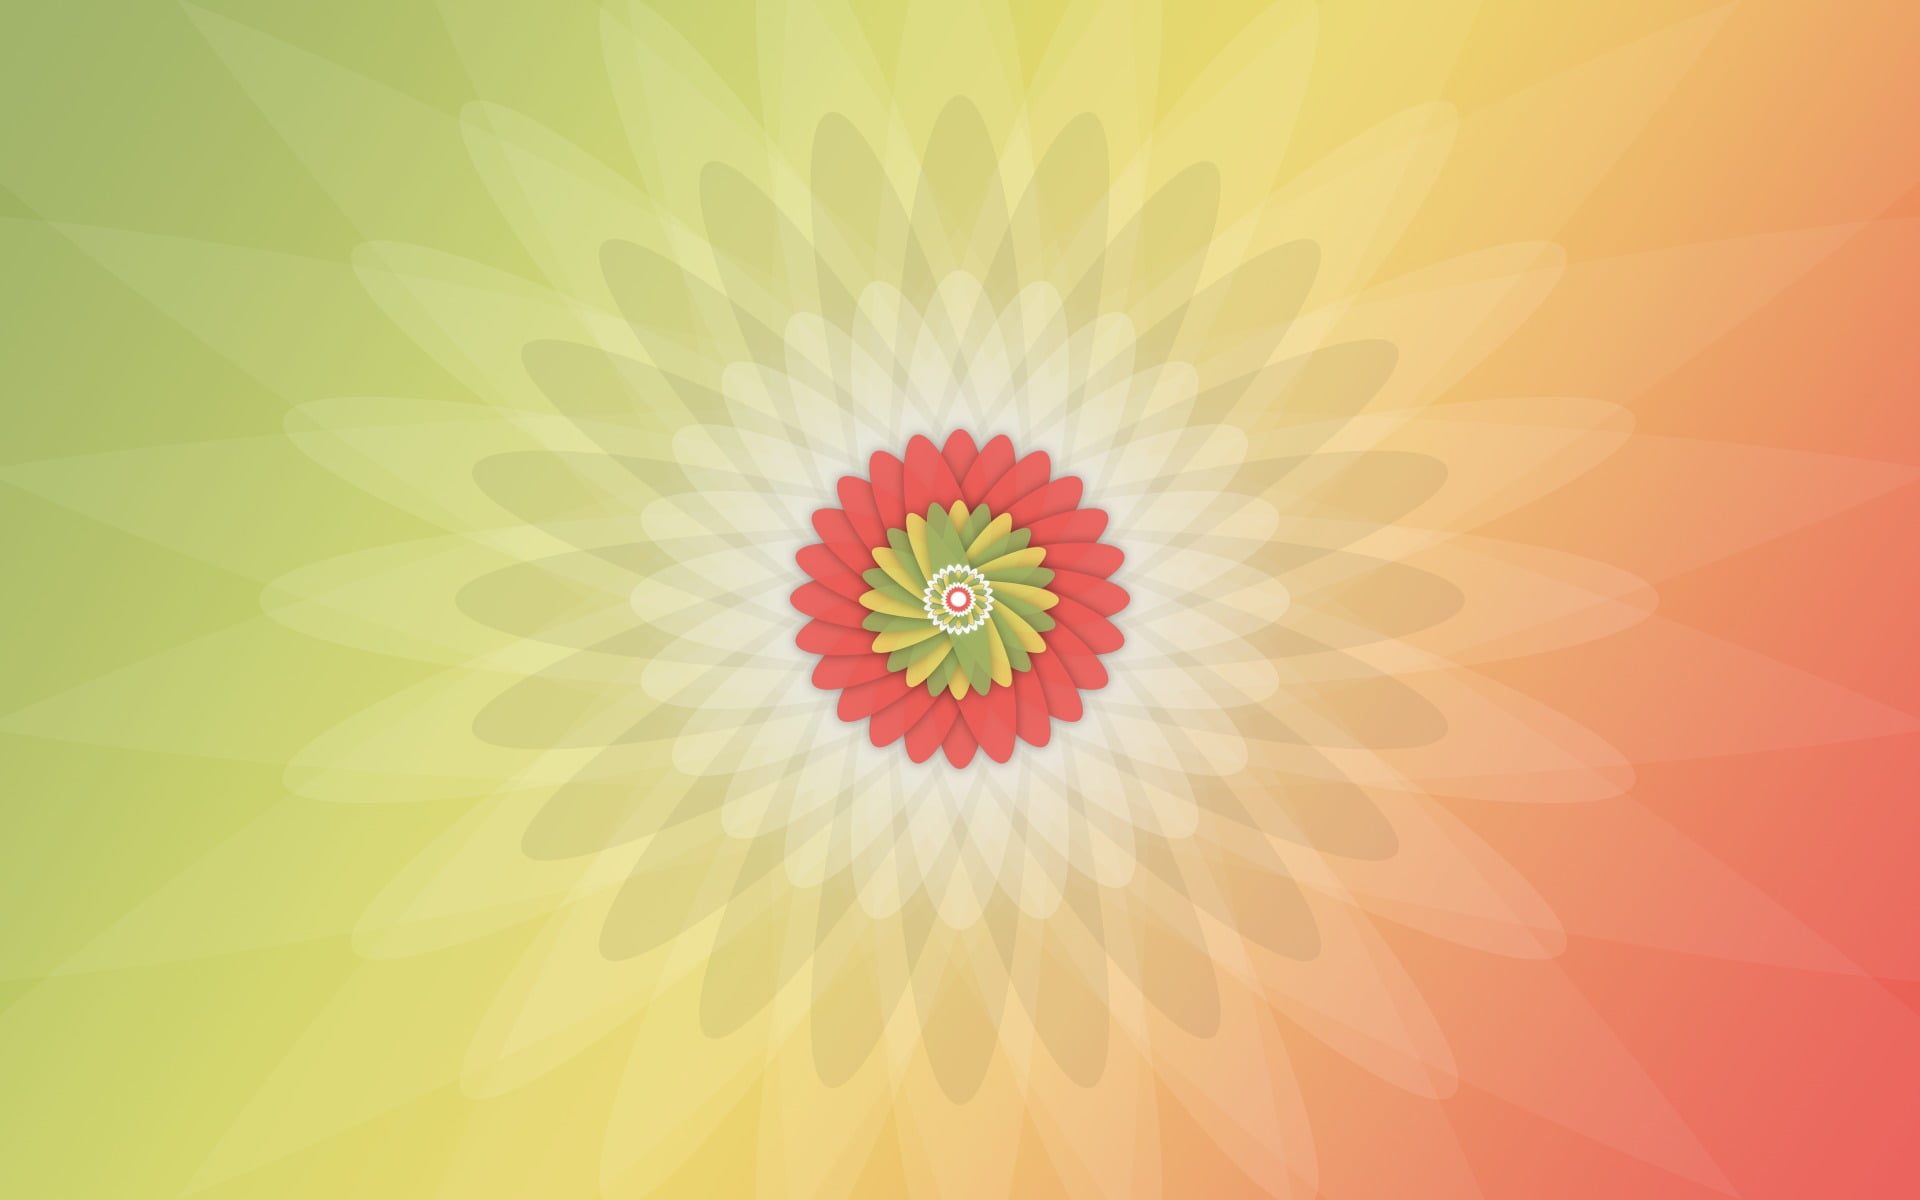 red, green, and yellow abstract illustration, geometry, minimalism